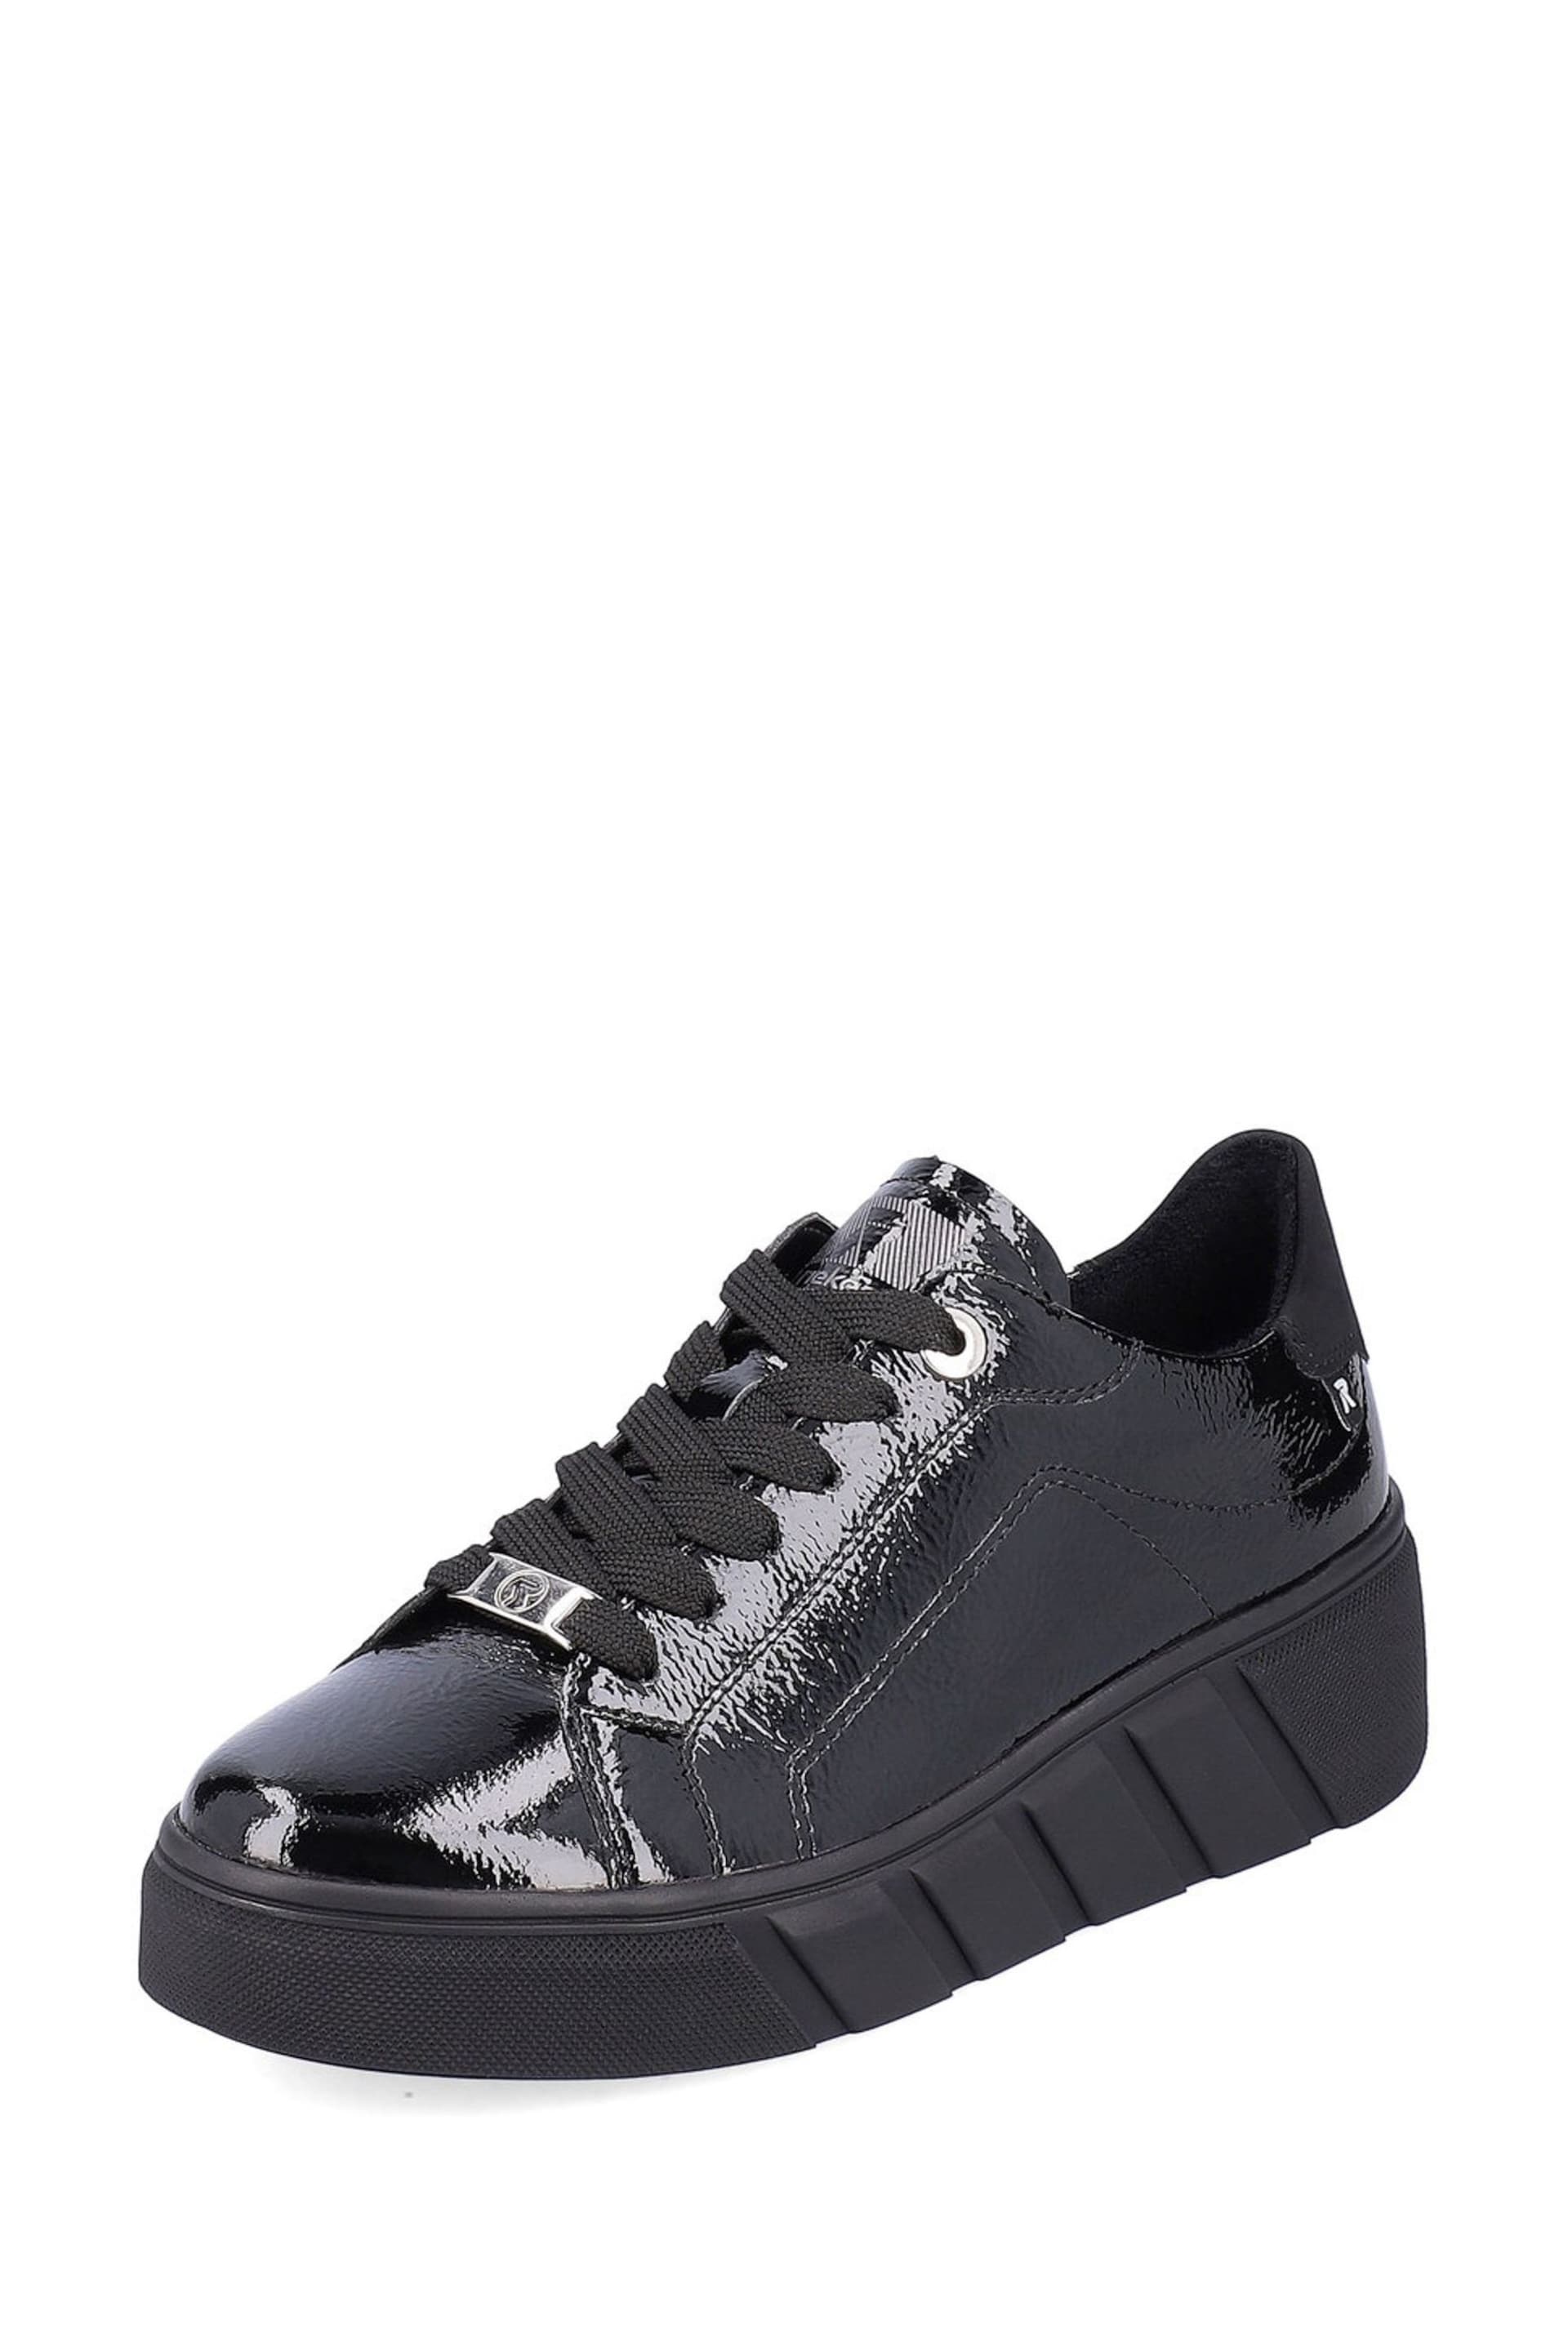 Rieker Womens Evolution Lace-Up Black Shoes - Image 3 of 11